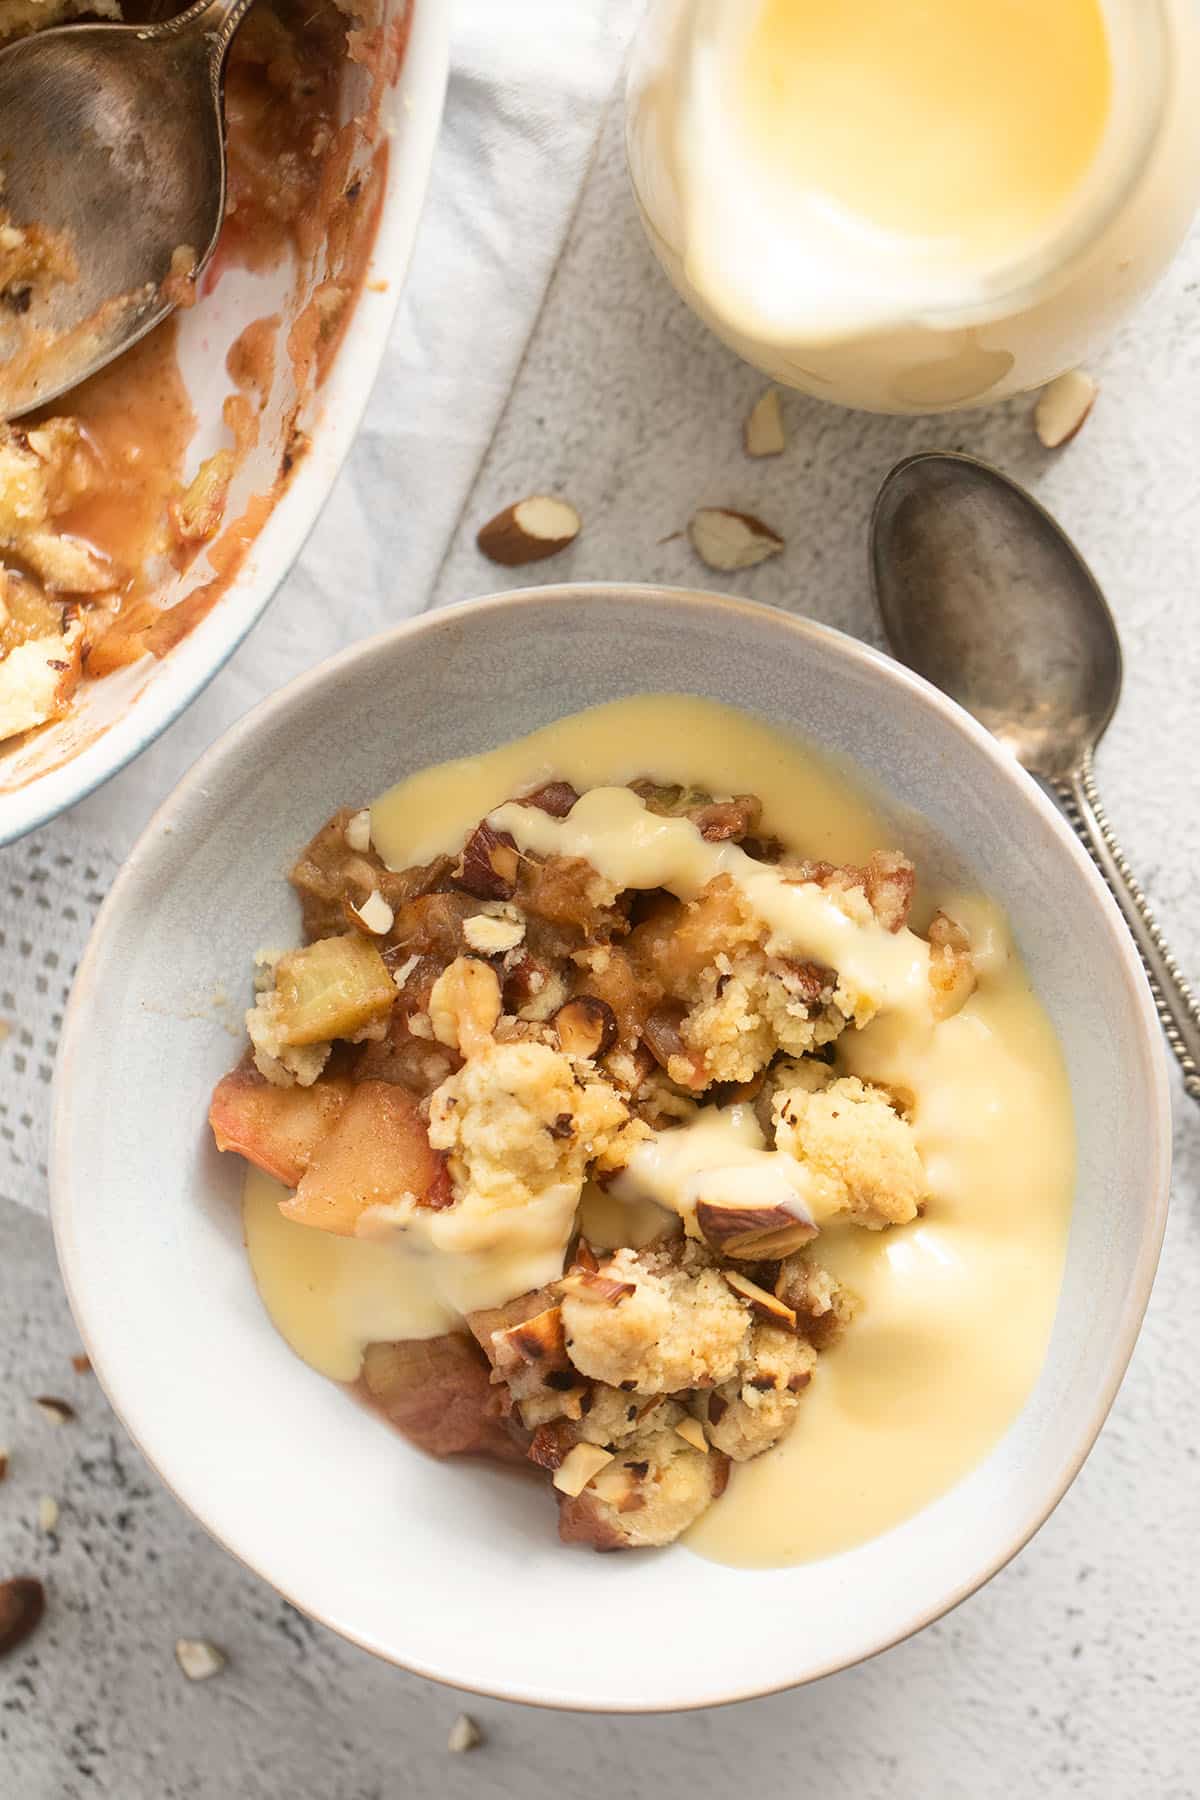 bowl of apple and rhubarb crumble topped with smooth vanilla sauce.